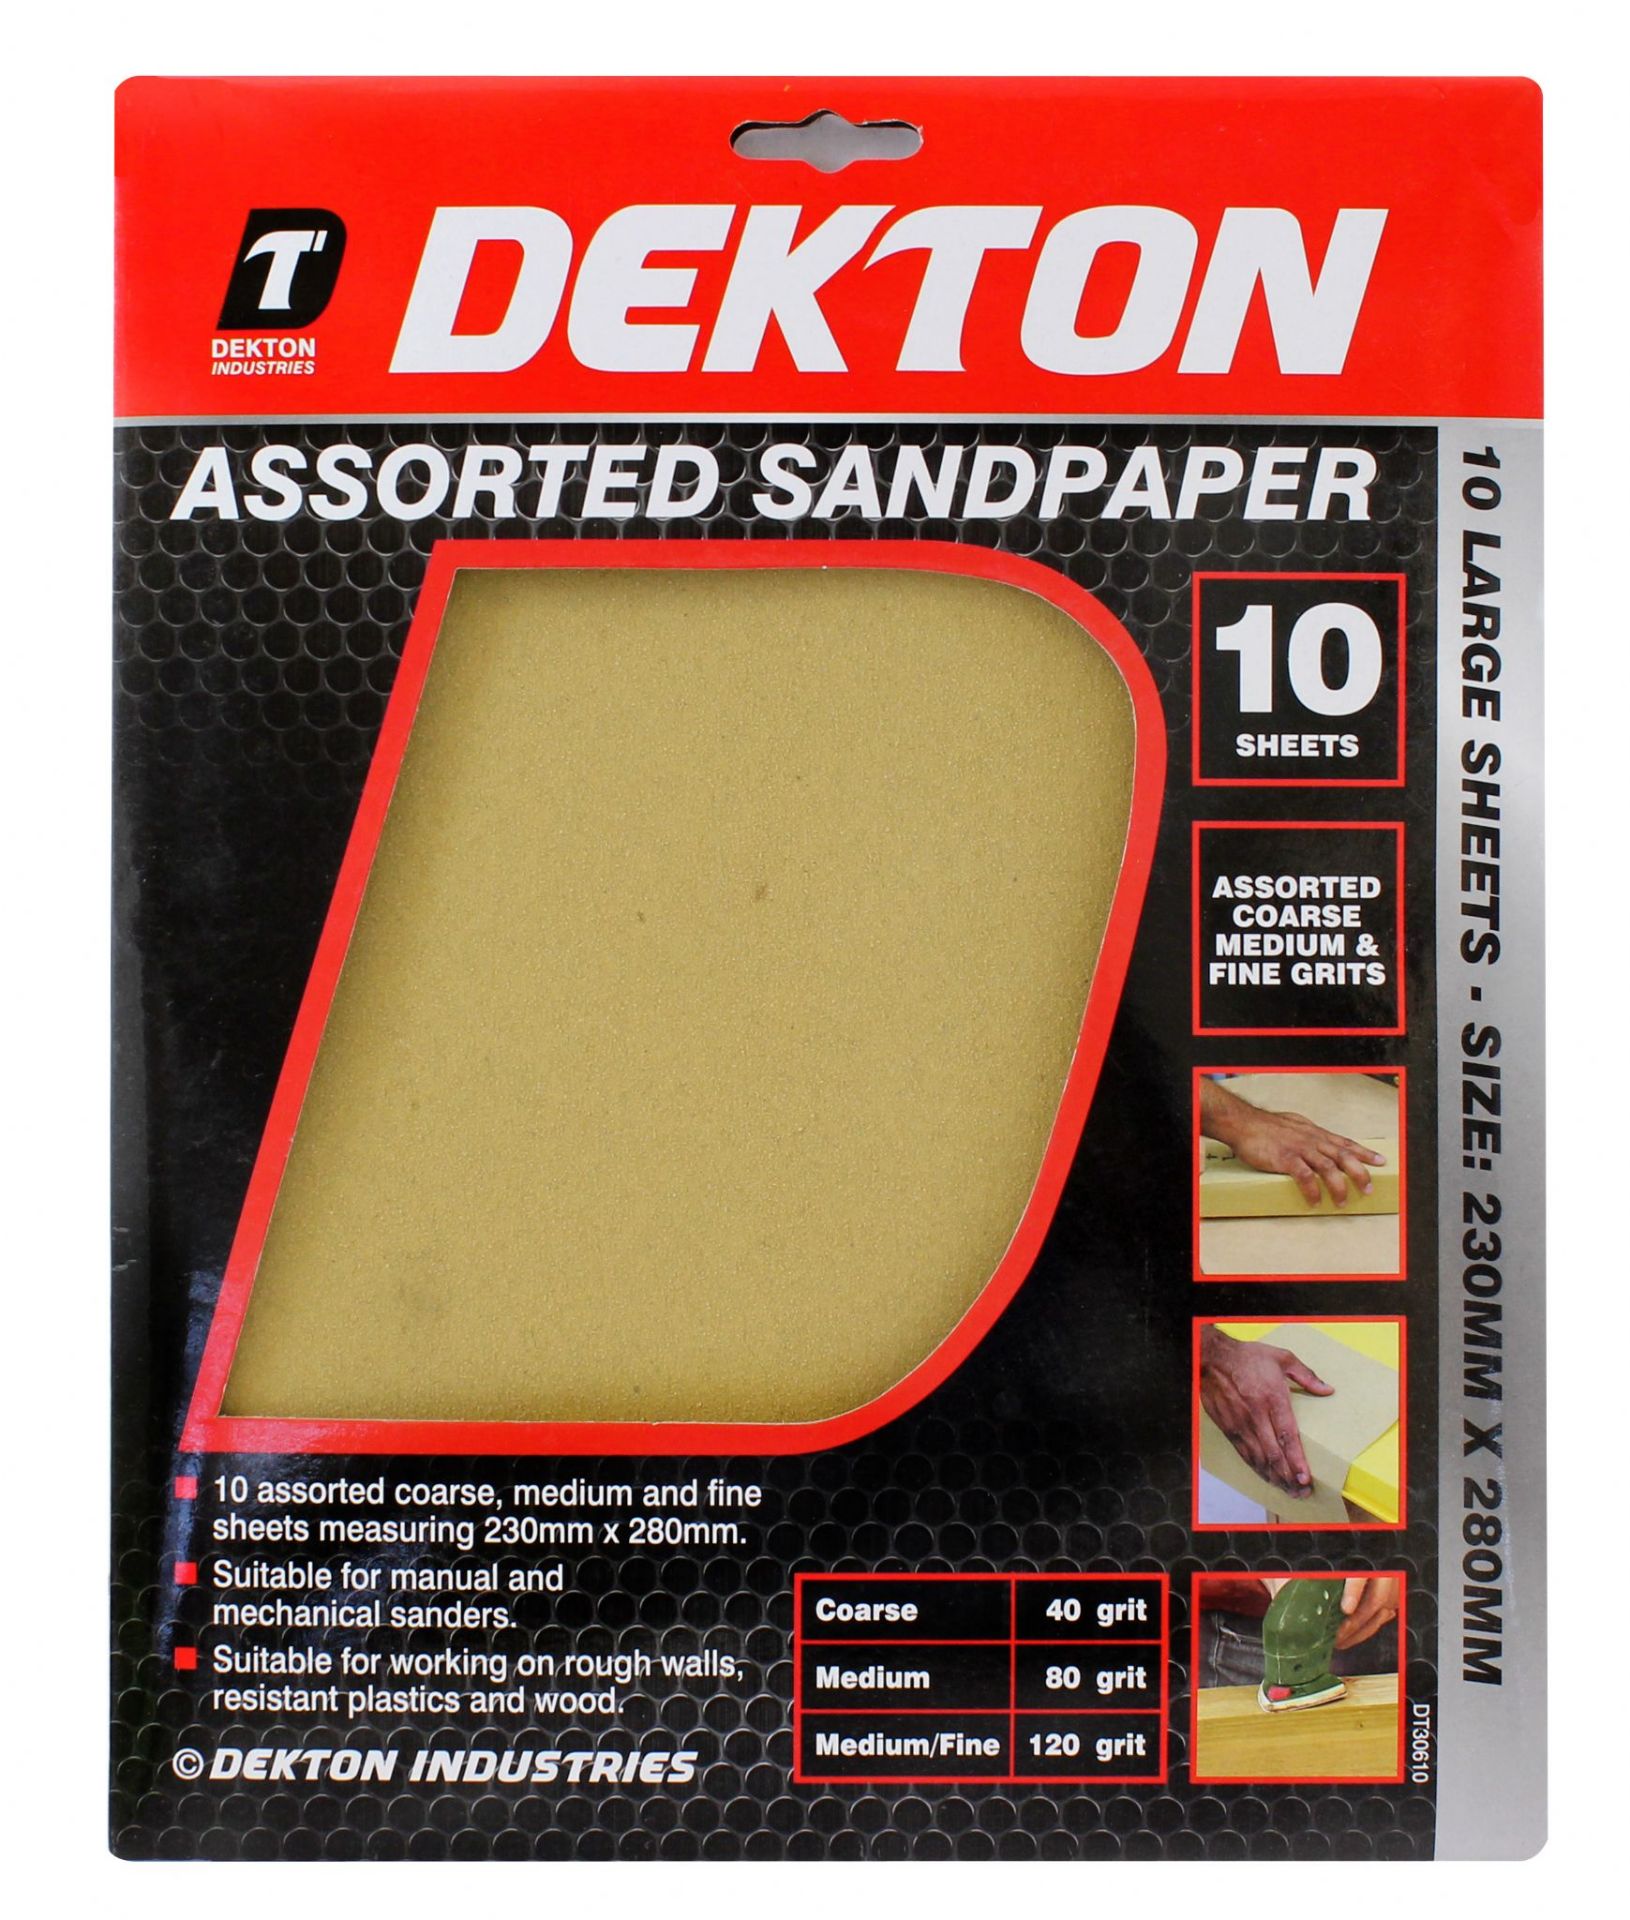 x2 Packs Of 10 Sheets Assorted Sandpaper Sheets (20 Sheets Total)